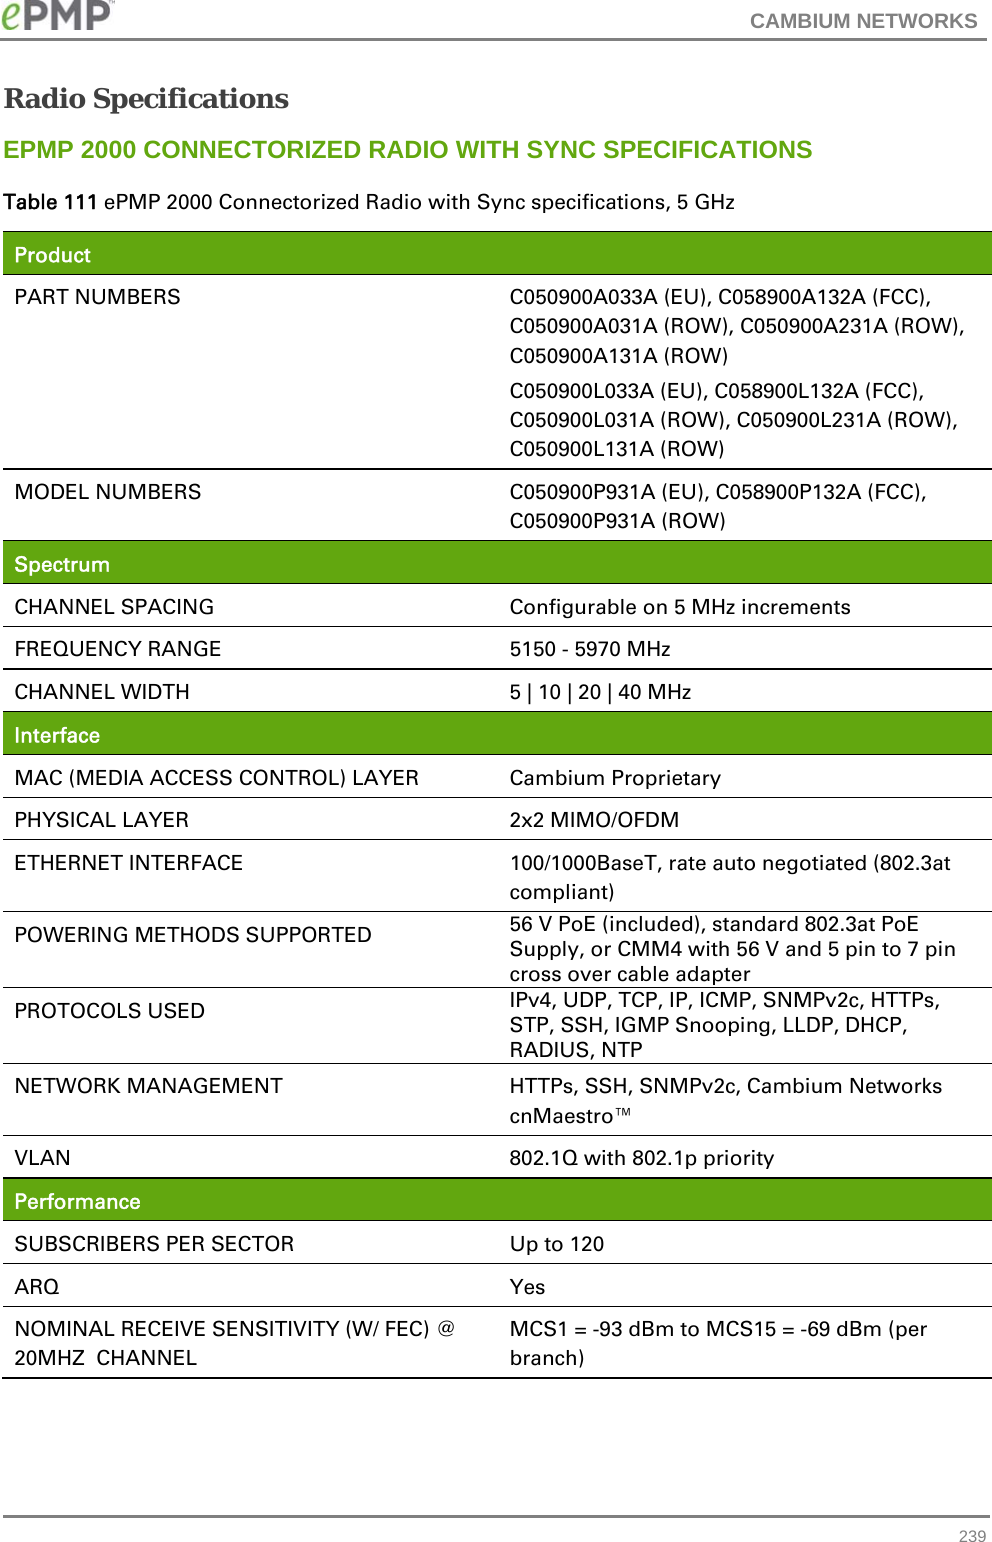 CAMBIUM NETWORKS   239Radio Specifications EPMP 2000 CONNECTORIZED RADIO WITH SYNC SPECIFICATIONS Table 111 ePMP 2000 Connectorized Radio with Sync specifications, 5 GHz Product  PART NUMBERS  C050900A033A (EU), C058900A132A (FCC), C050900A031A (ROW), C050900A231A (ROW), C050900A131A (ROW) C050900L033A (EU), C058900L132A (FCC), C050900L031A (ROW), C050900L231A (ROW), C050900L131A (ROW) MODEL NUMBERS  C050900P931A (EU), C058900P132A (FCC), C050900P931A (ROW) Spectrum  CHANNEL SPACING  Configurable on 5 MHz increments FREQUENCY RANGE  5150 - 5970 MHz CHANNEL WIDTH  5 | 10 | 20 | 40 MHz   Interface  MAC (MEDIA ACCESS CONTROL) LAYER  Cambium Proprietary PHYSICAL LAYER  2x2 MIMO/OFDM ETHERNET INTERFACE  100/1000BaseT, rate auto negotiated (802.3at compliant) POWERING METHODS SUPPORTED  56 V PoE (included), standard 802.3at PoE Supply, or CMM4 with 56 V and 5 pin to 7 pin cross over cable adapter PROTOCOLS USED  IPv4, UDP, TCP, IP, ICMP, SNMPv2c, HTTPs, STP, SSH, IGMP Snooping, LLDP, DHCP, RADIUS, NTP NETWORK MANAGEMENT  HTTPs, SSH, SNMPv2c, Cambium Networks cnMaestro™ VLAN  802.1Q with 802.1p priority Performance  SUBSCRIBERS PER SECTOR  Up to 120 ARQ Yes NOMINAL RECEIVE SENSITIVITY (W/ FEC) @ 20MHZ  CHANNEL MCS1 = -93 dBm to MCS15 = -69 dBm (per branch) 